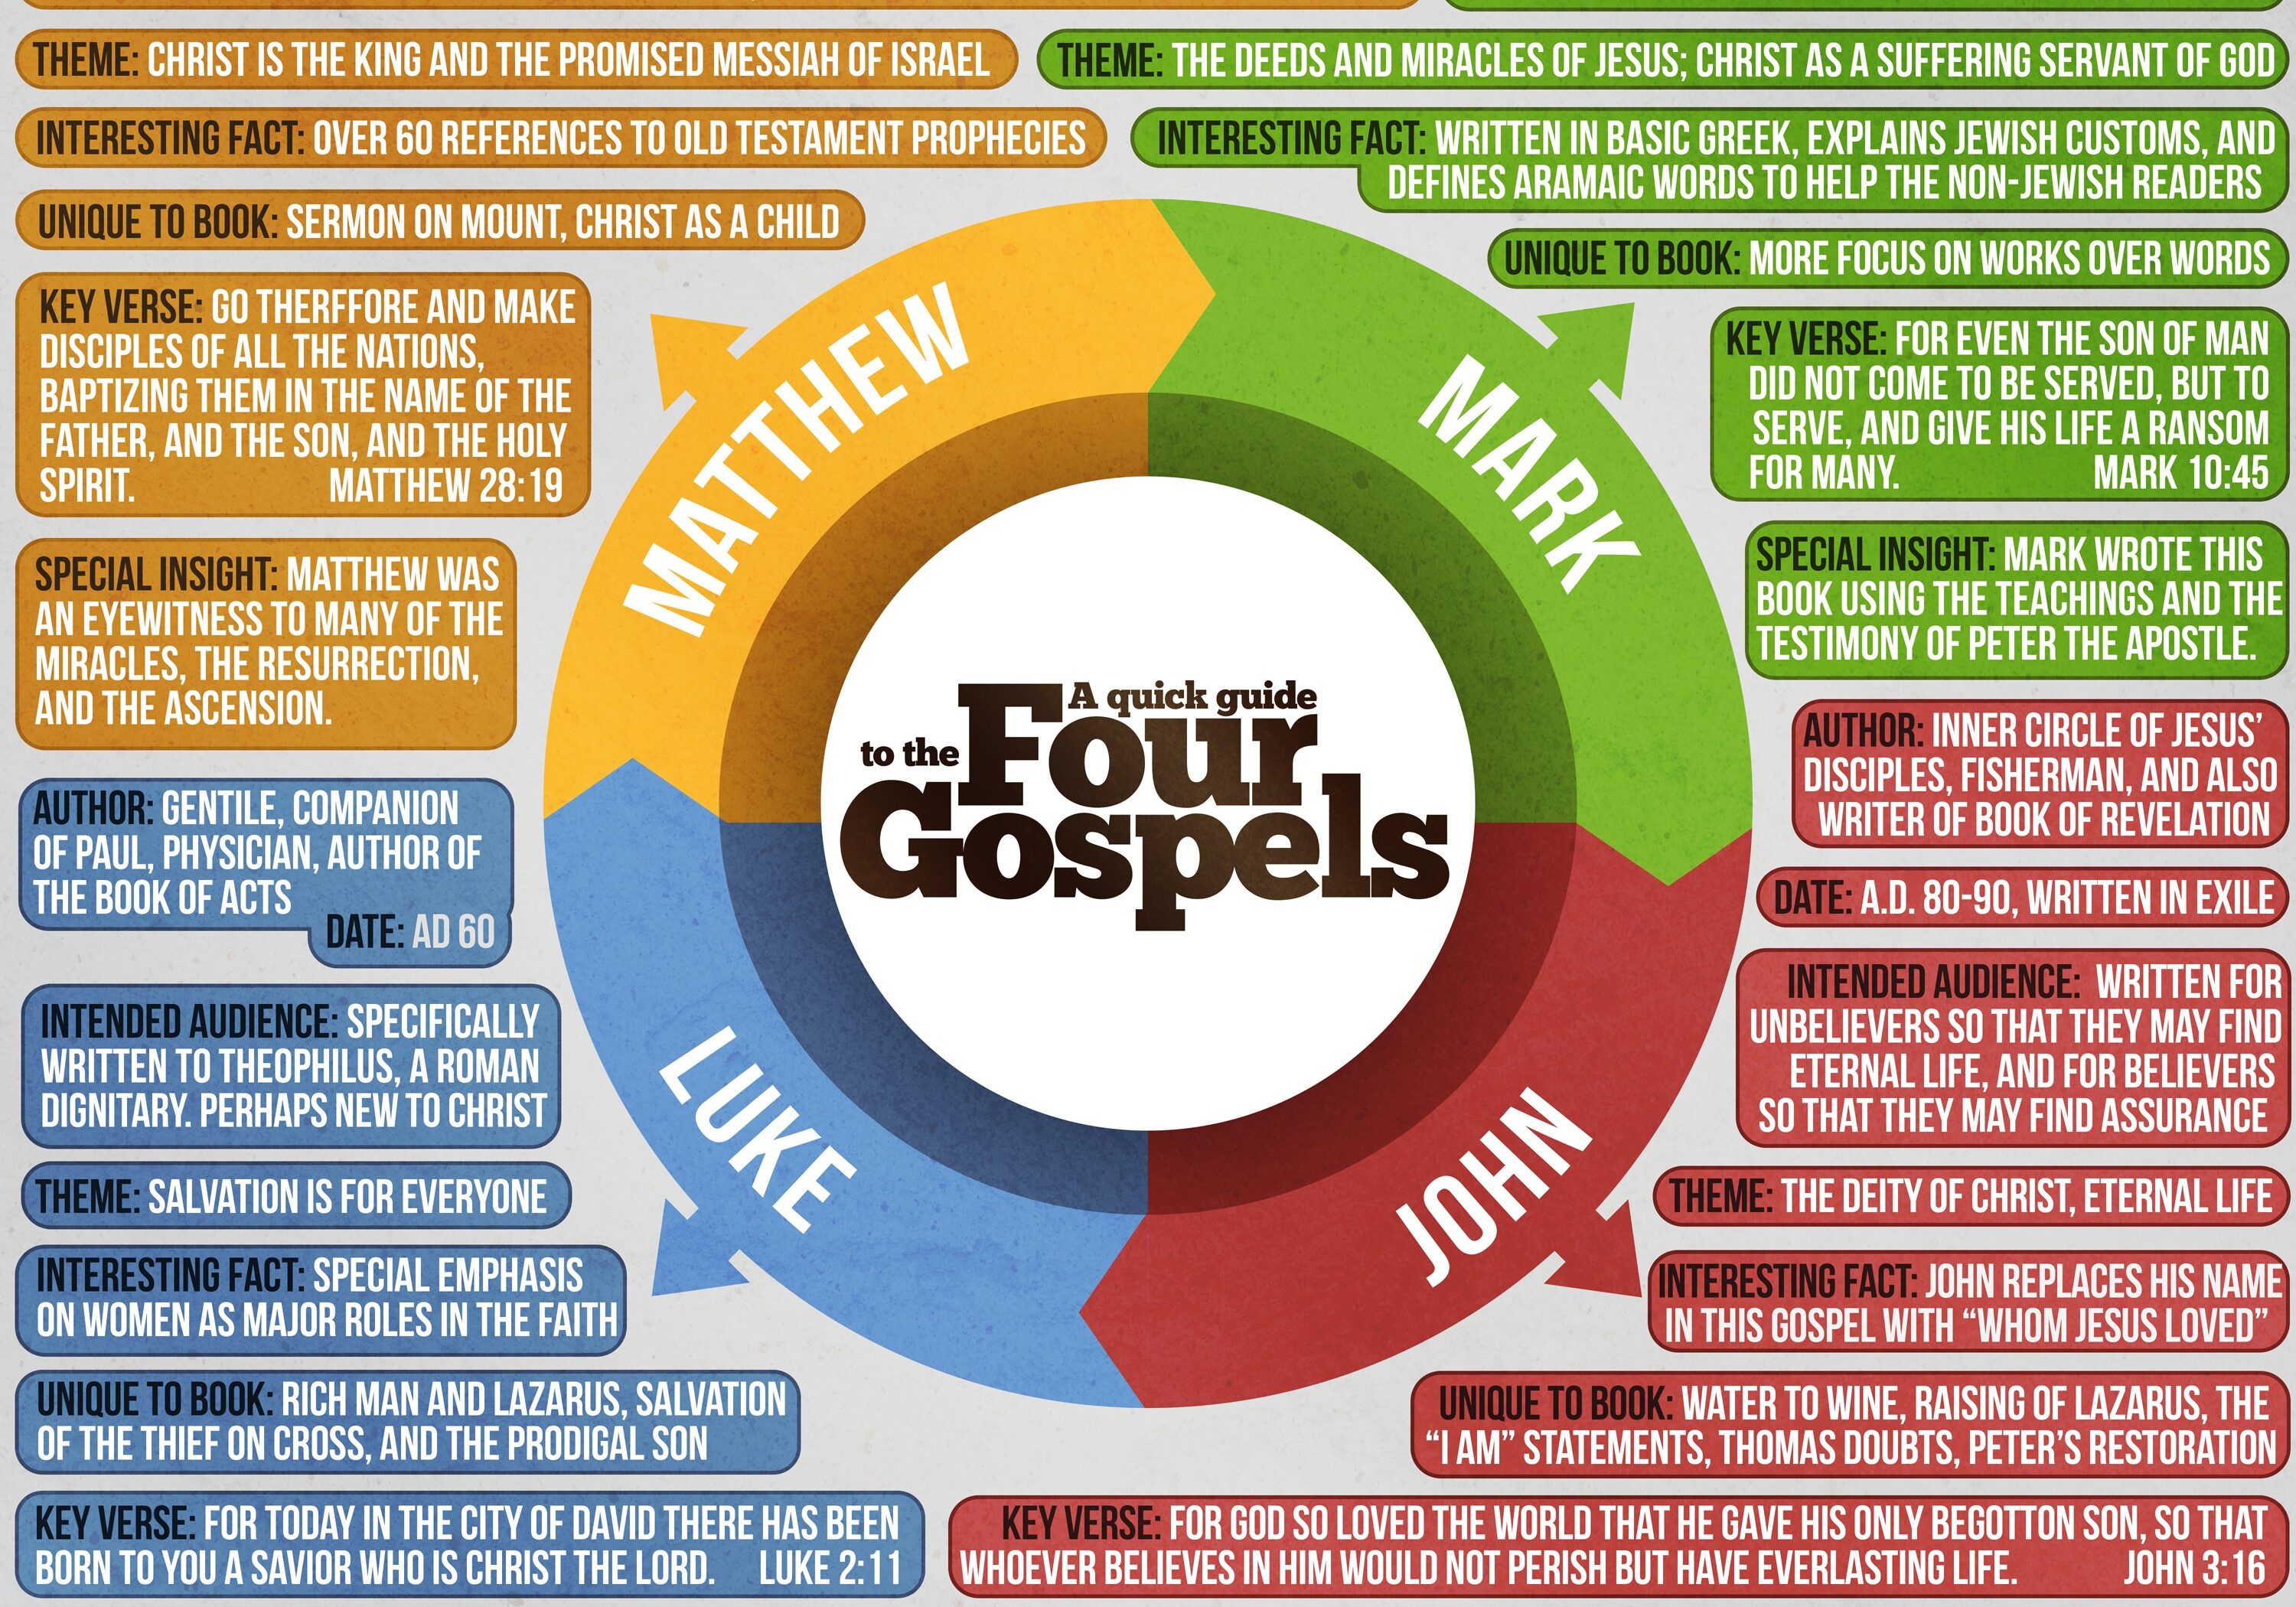 A quick reference guide to the four gospels